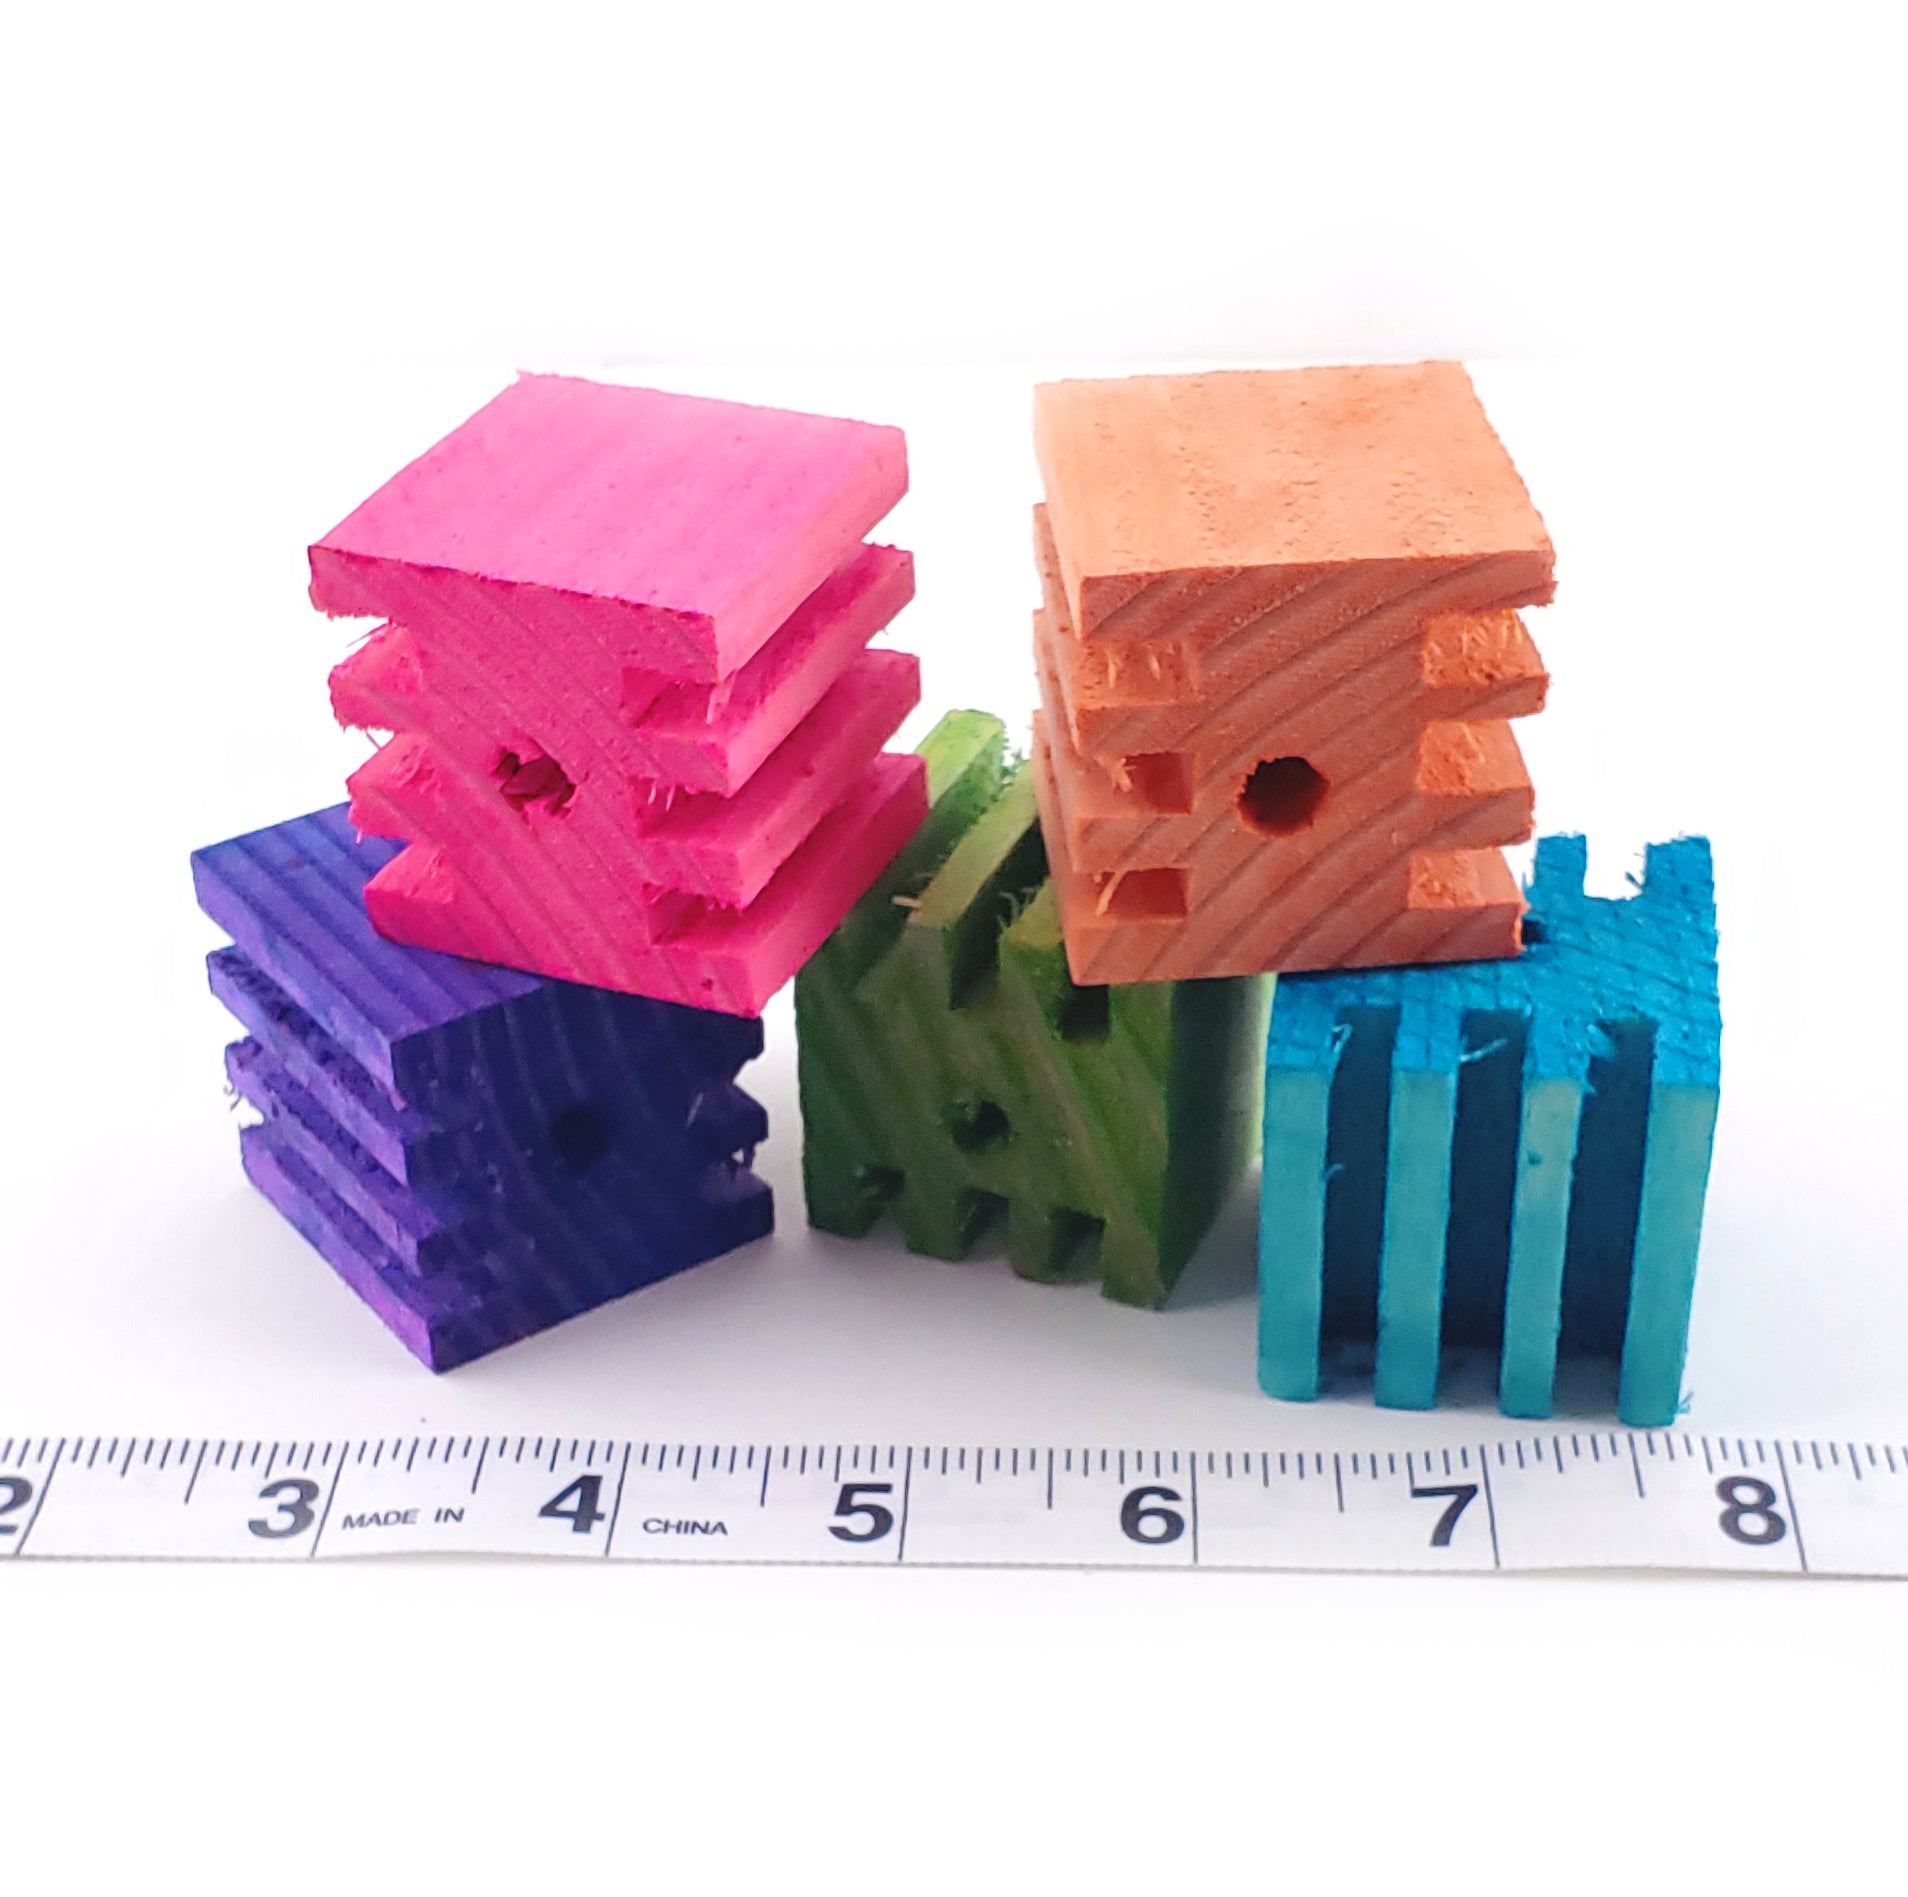 1.5" Soft Pine Puzzler Blocks - Colored 12 Pack